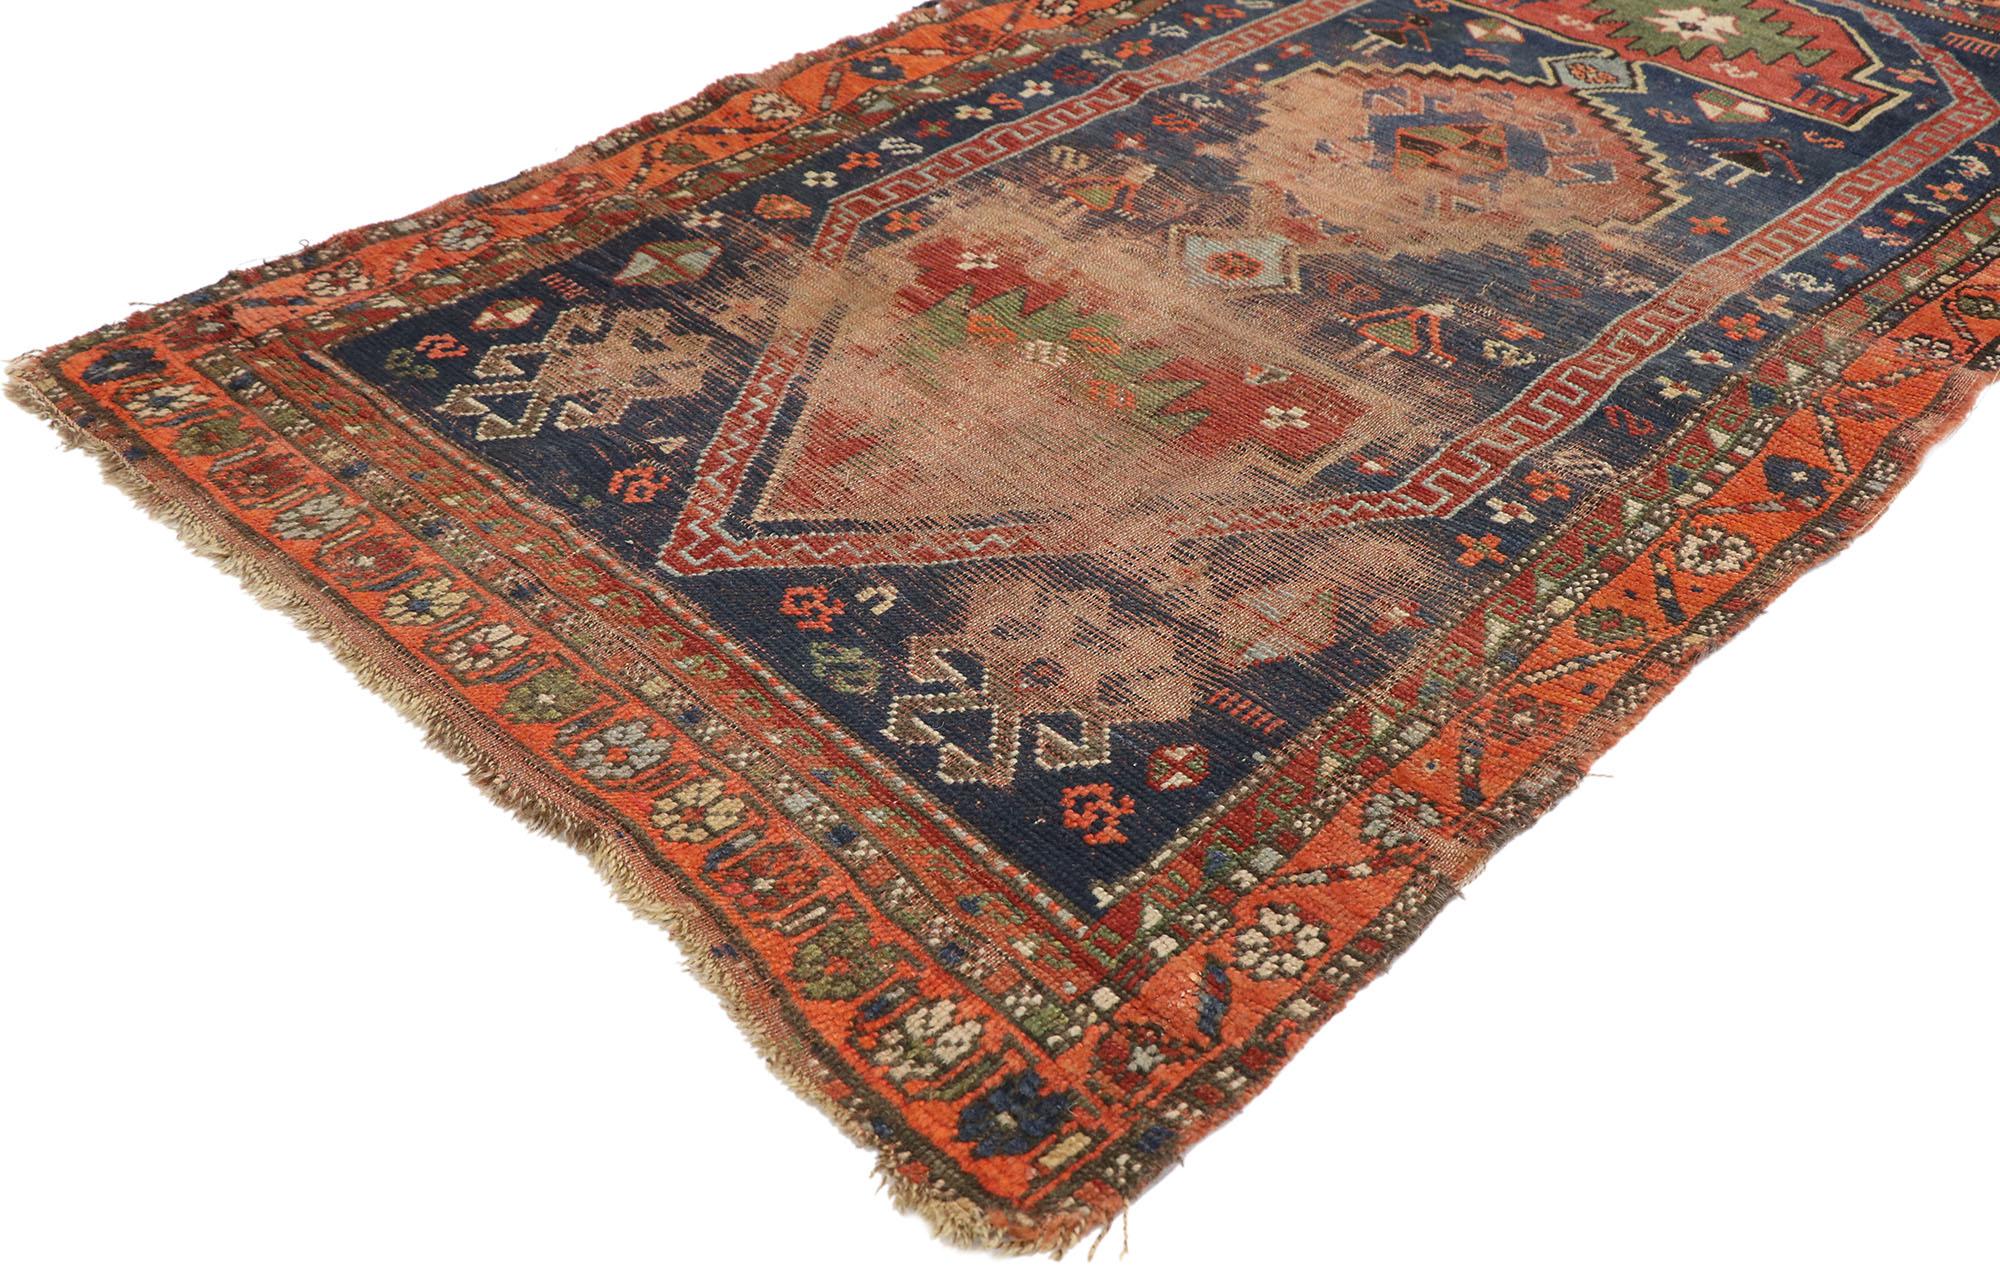 77659 Distressed Antique Persian Shiraz rug with Rustic Tribal style 03'00 x 05'02. Full of tiny details and a bold expressive design combined with exuberant colors and tribal style, this hand-knotted wool distressed antique Persian Shiraz rug is a